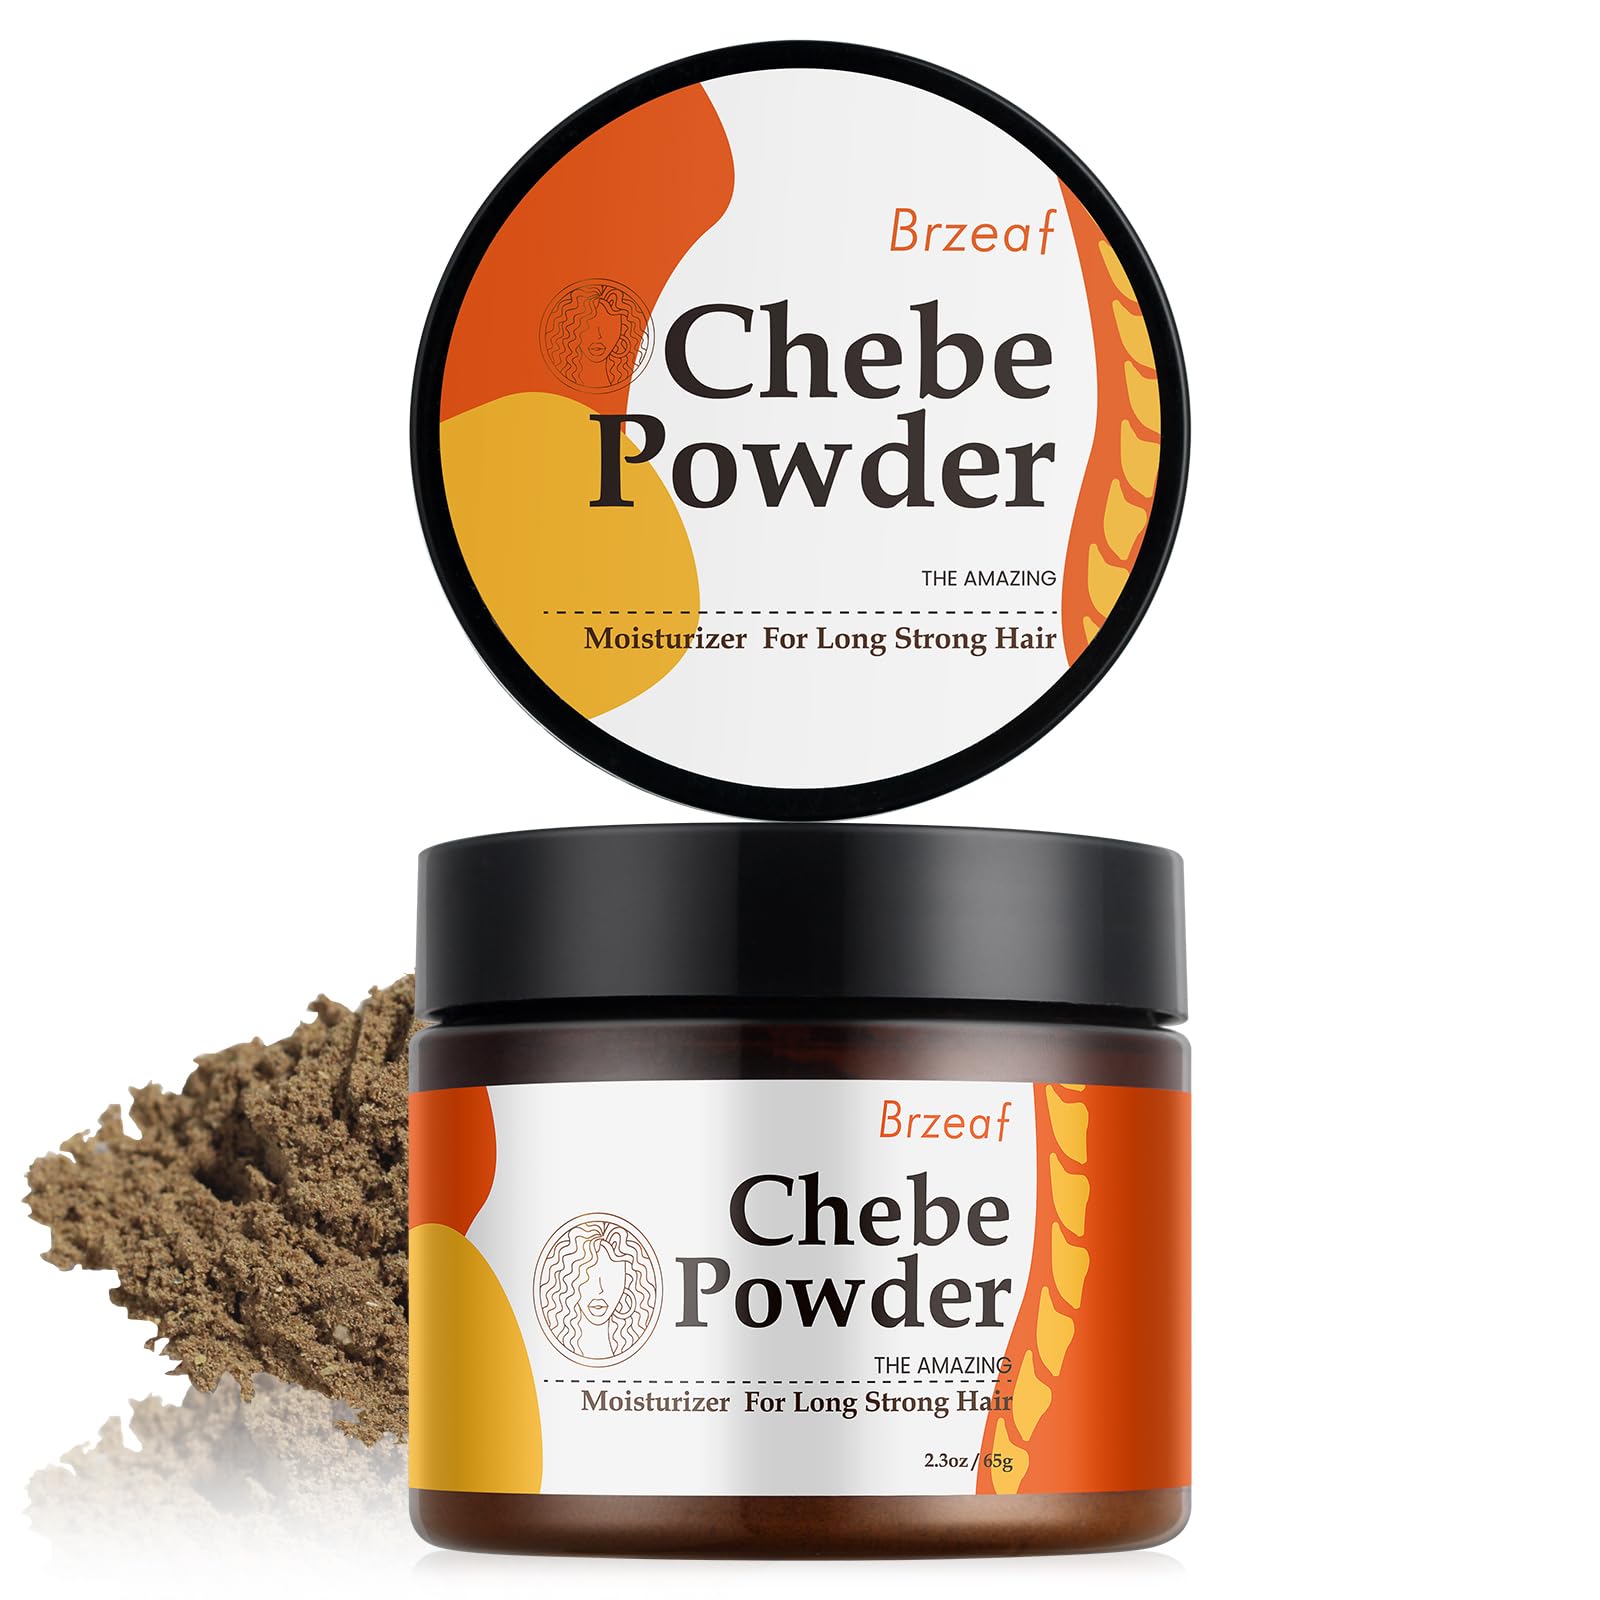 Brzeaf Natural Chebe Powder for Hair Growth from Chad(65g), African Chebe Powder- Super Moisturizing & Promote Hair Growth, Chebe Powder for All Hair Types, Deter Hair Breakage